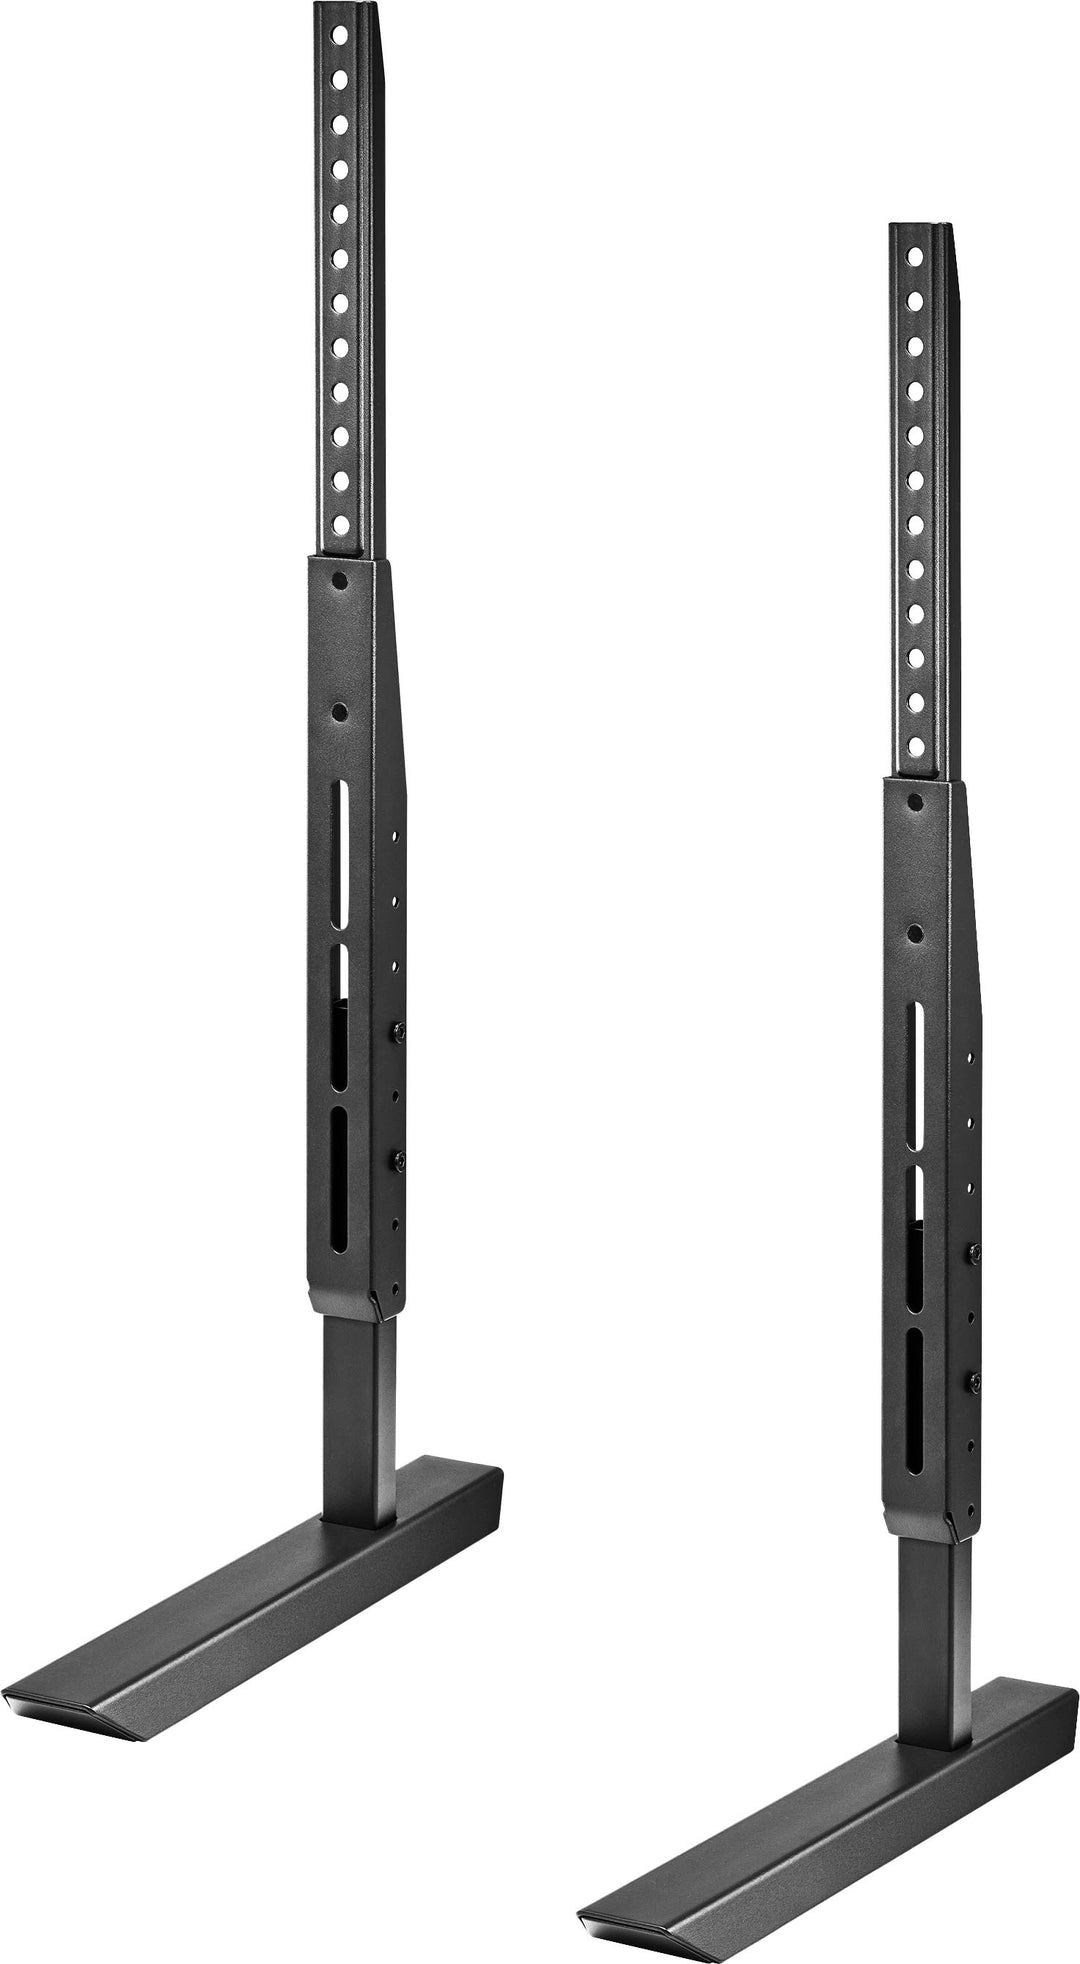 Insignia™ - Universal TV Feet Replacement Kit for TVs 49"-77" or 100 lbs - Black_4